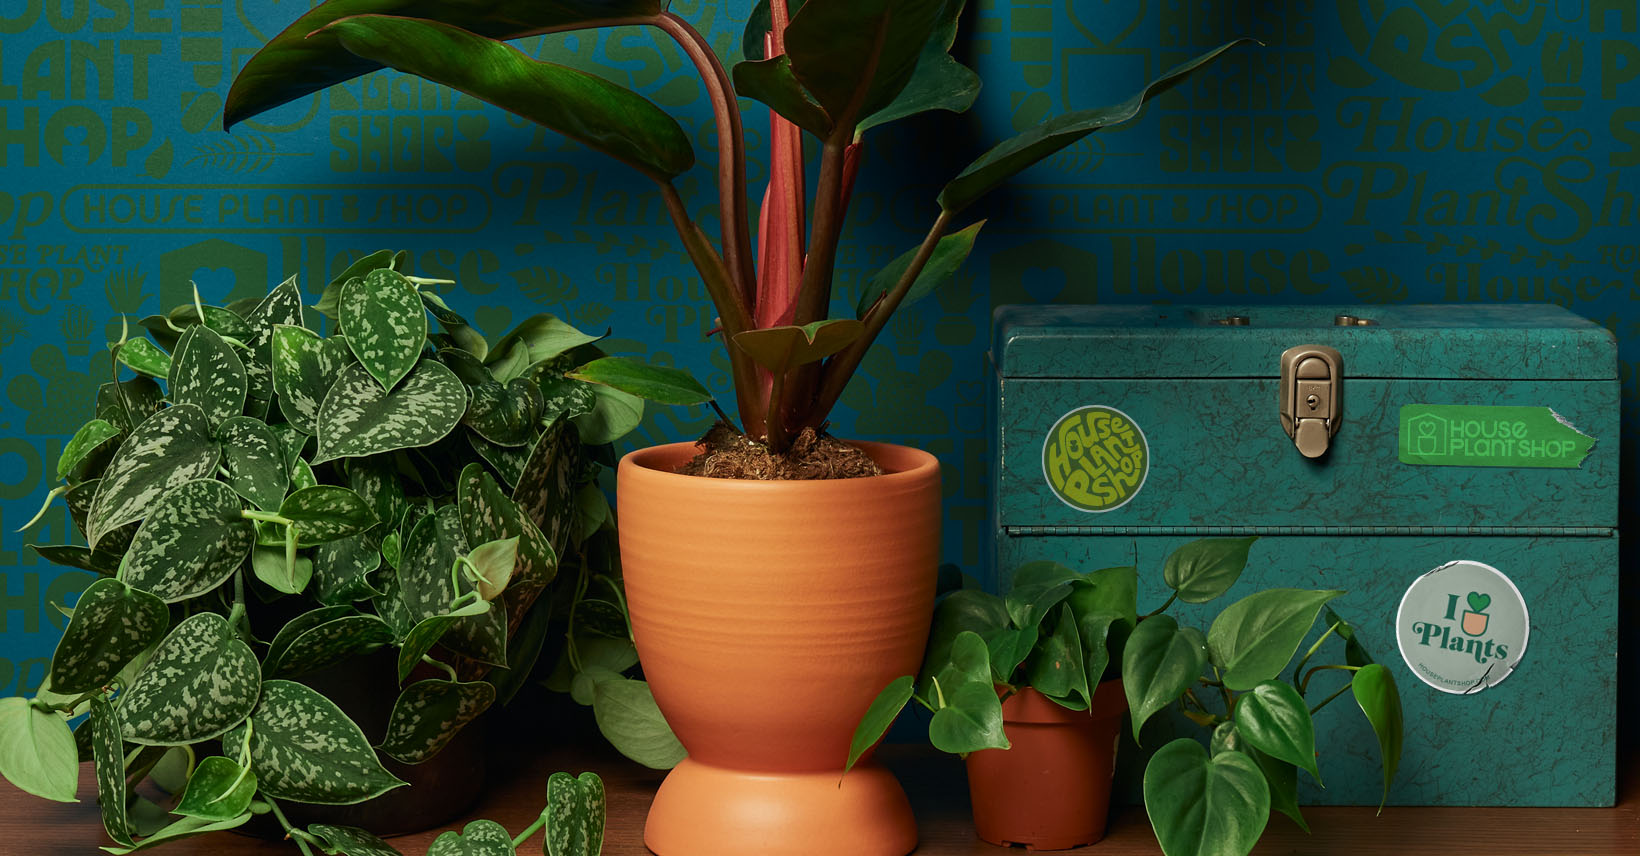 What marketplaces are best places to sell house plants online?